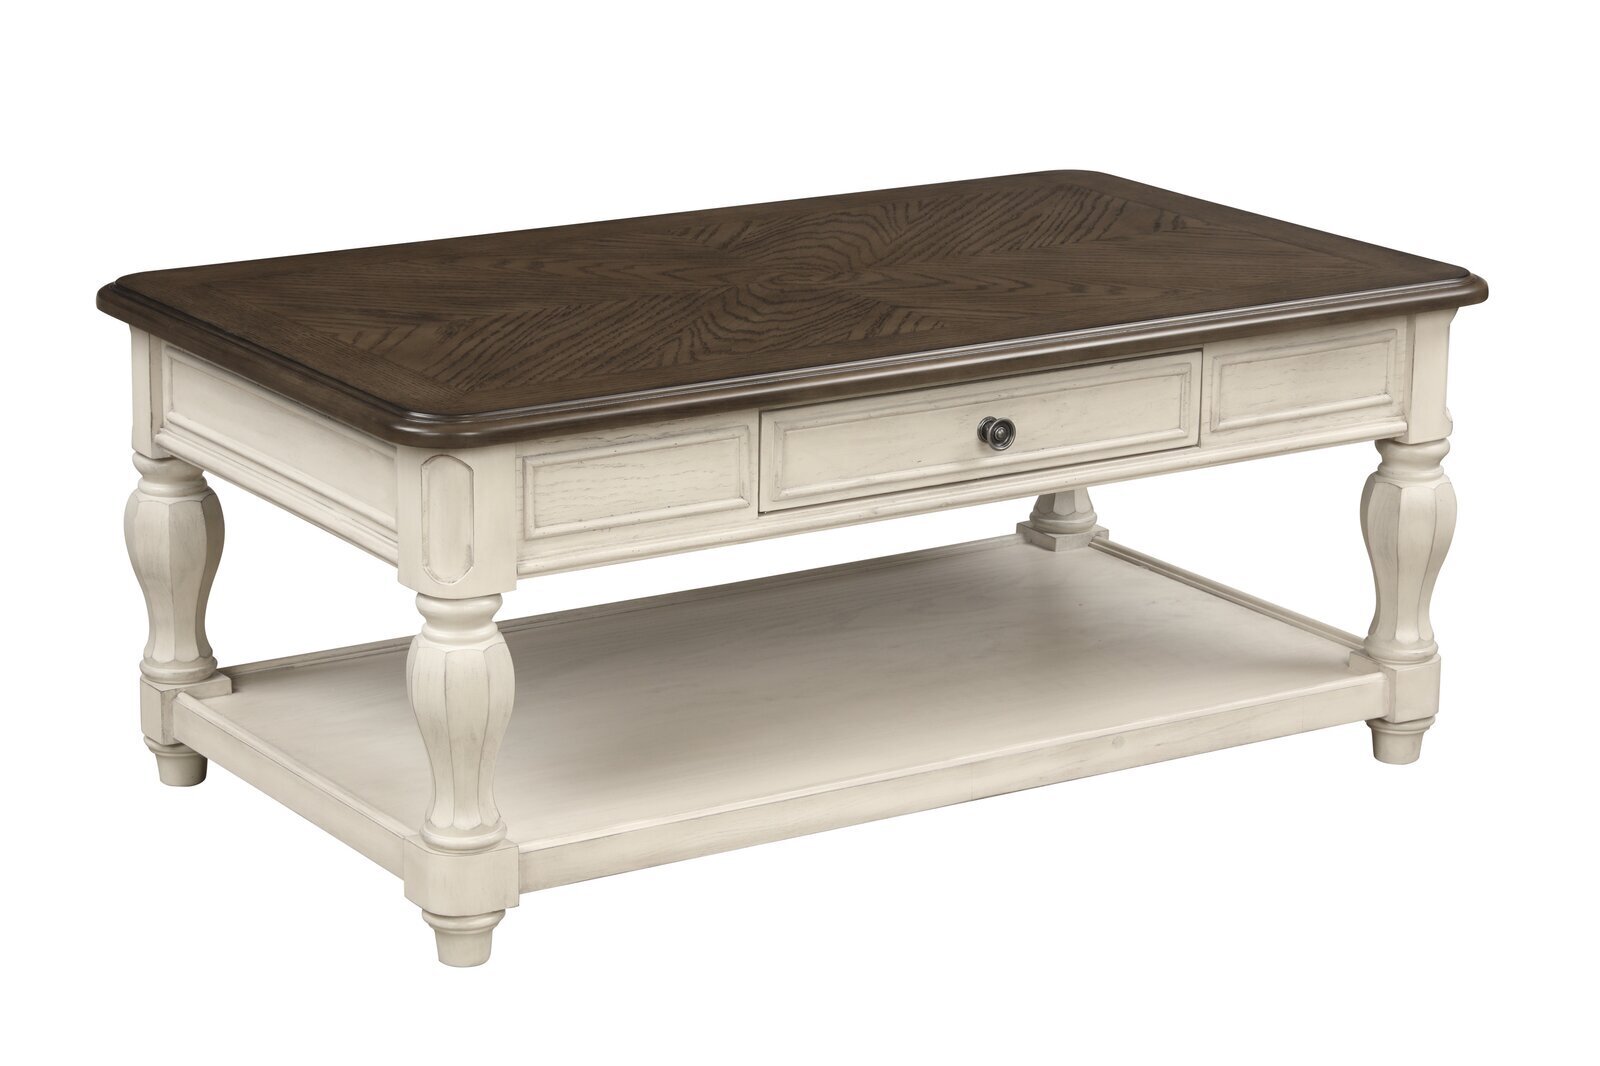 Shabby chic coffee table with storage